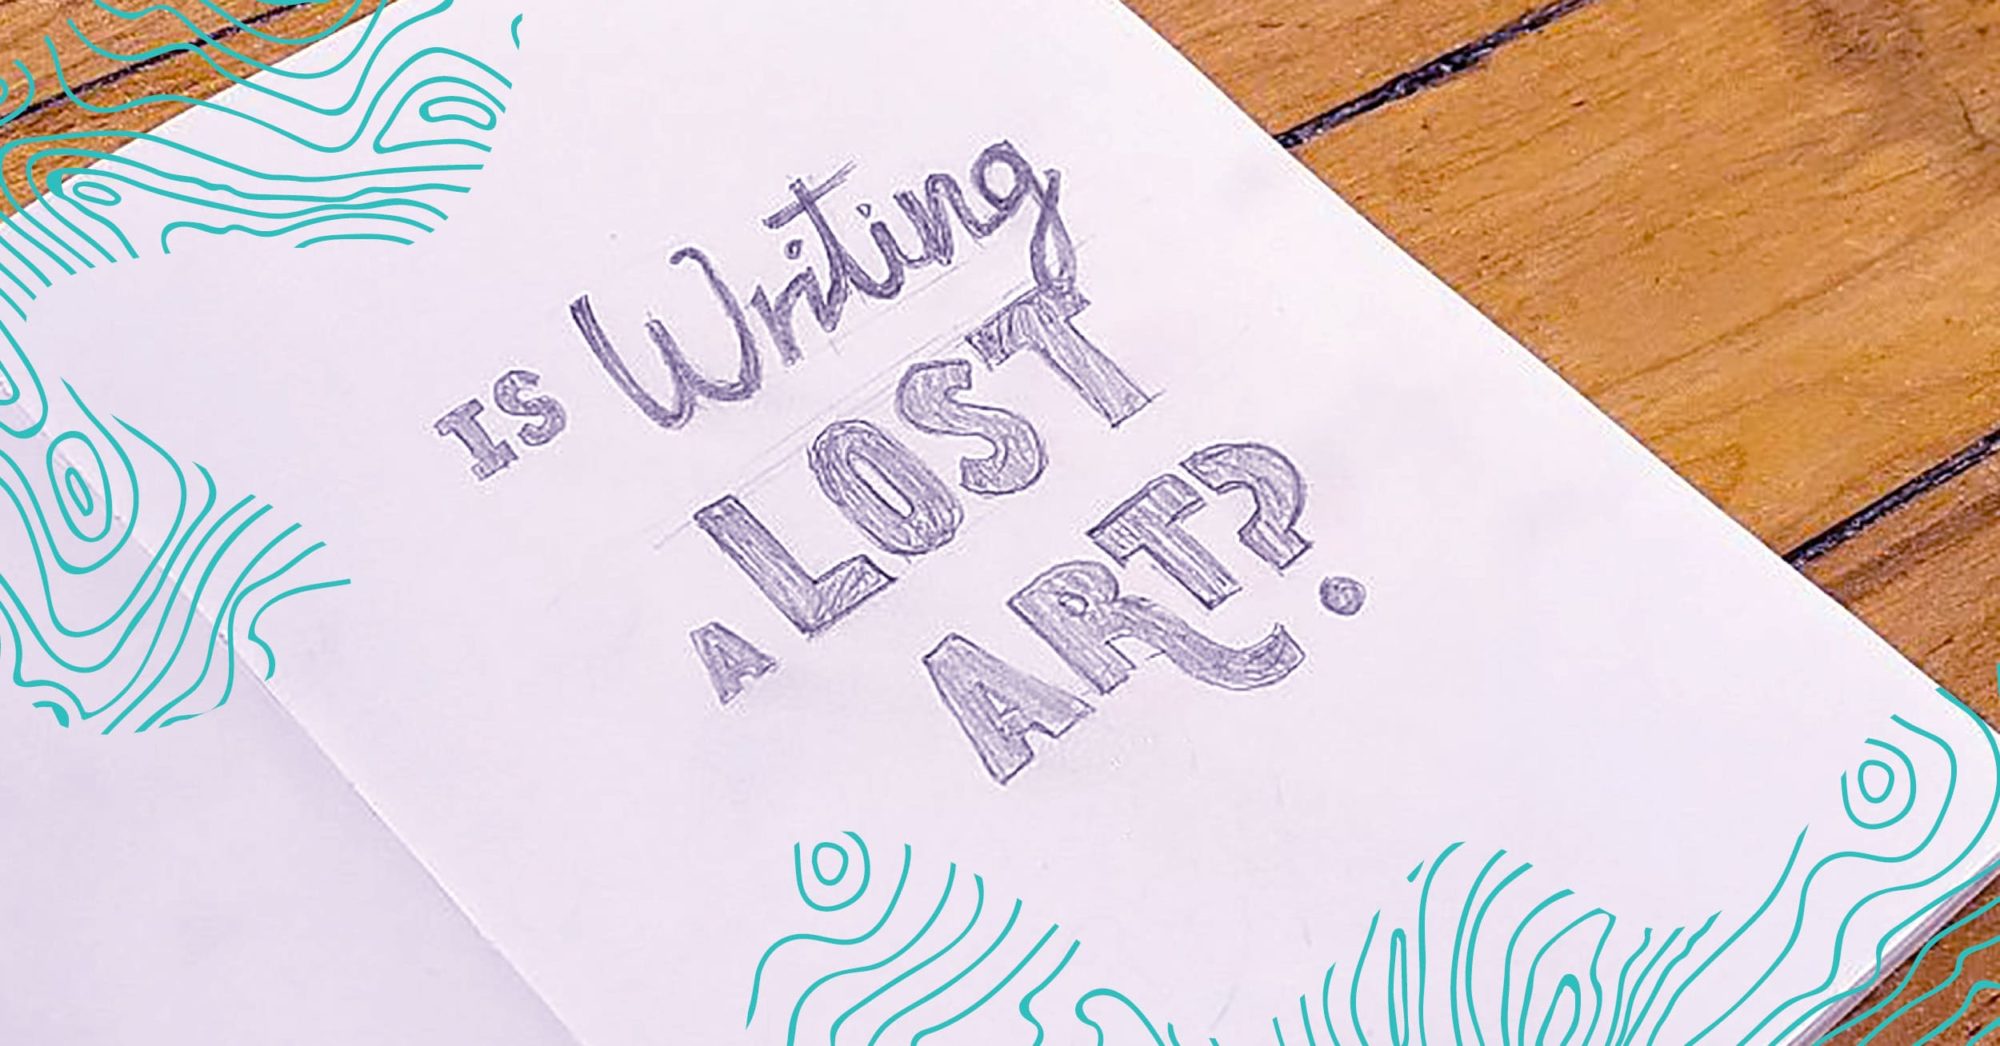 handwritten text stating "Is Writing a Lost Art?" in purple on a notebook with teal squiggles on the corner